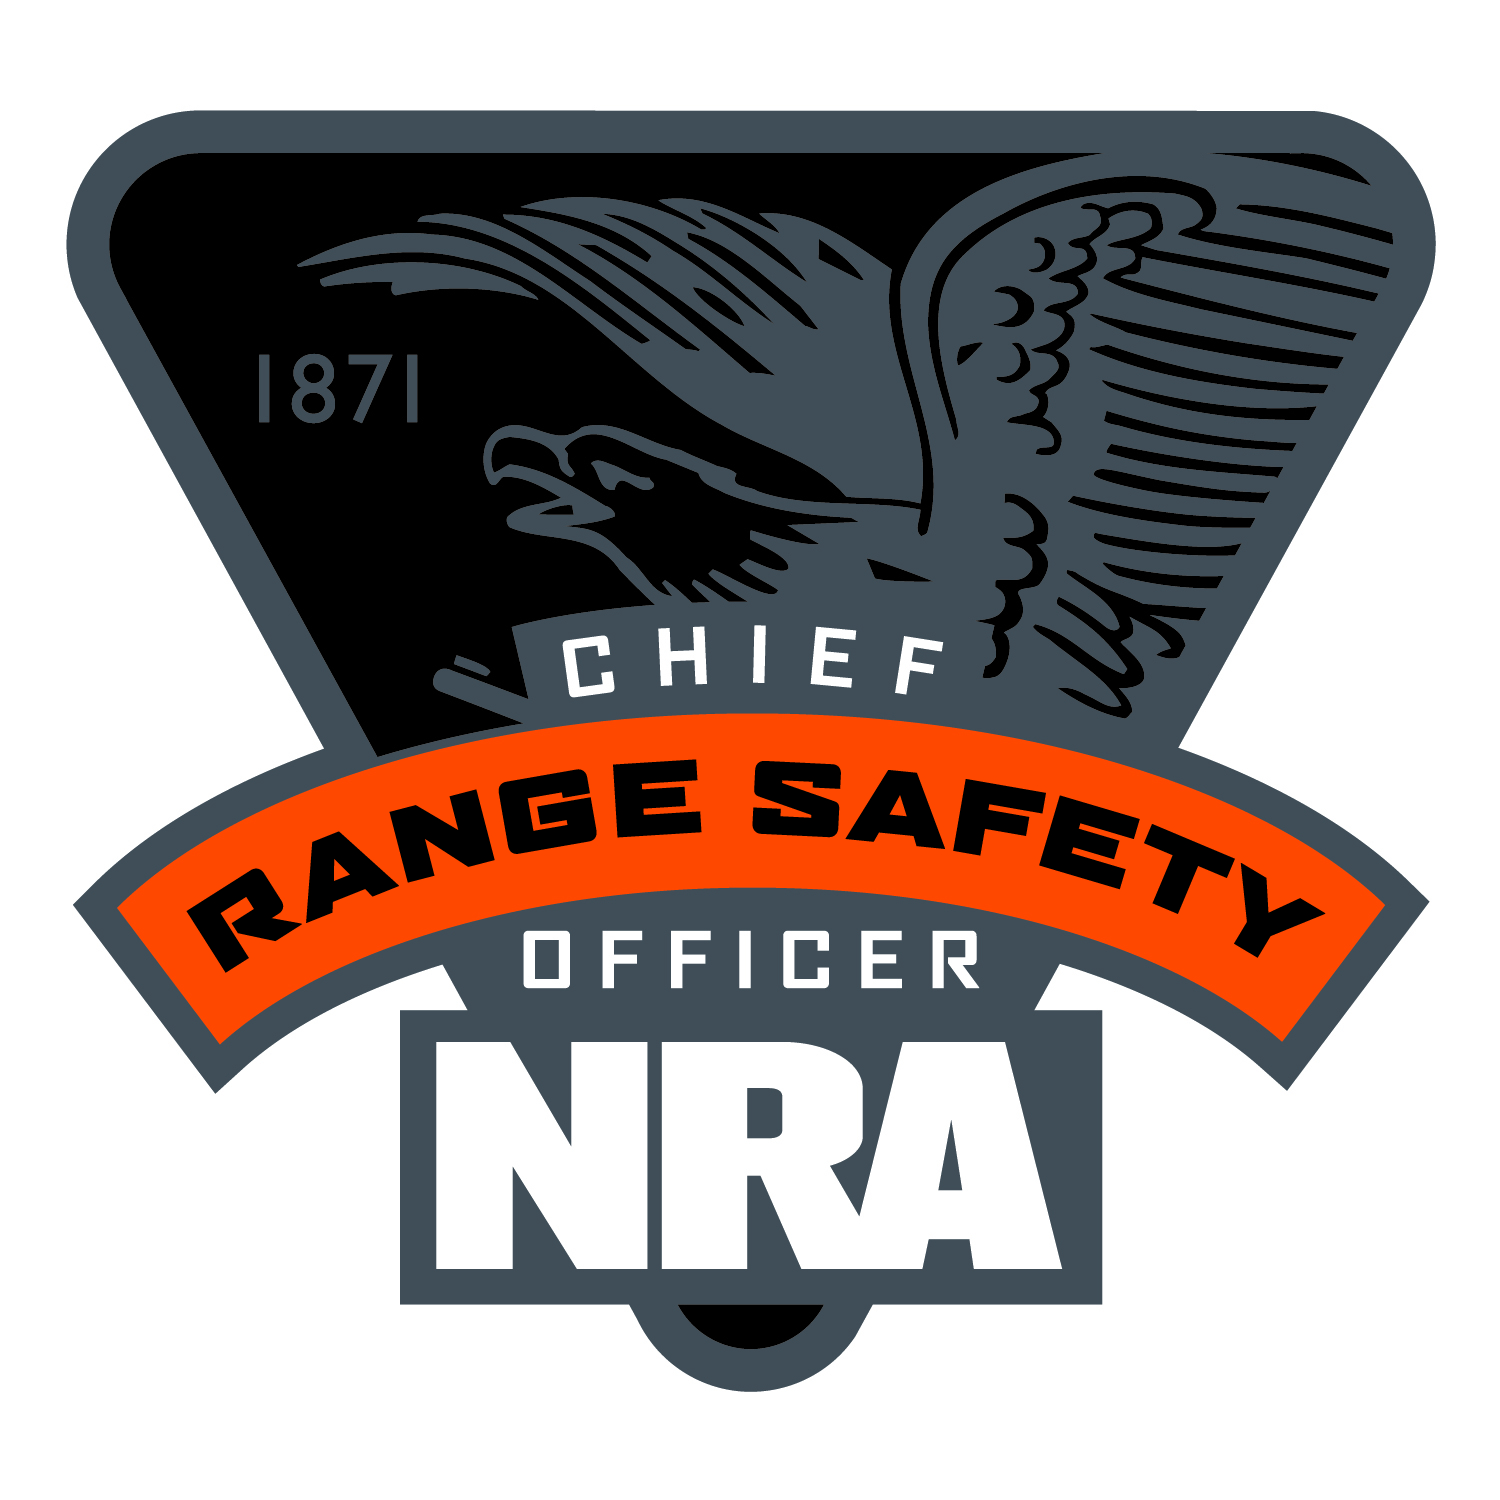 NRA Chief Range Safety Officer Course